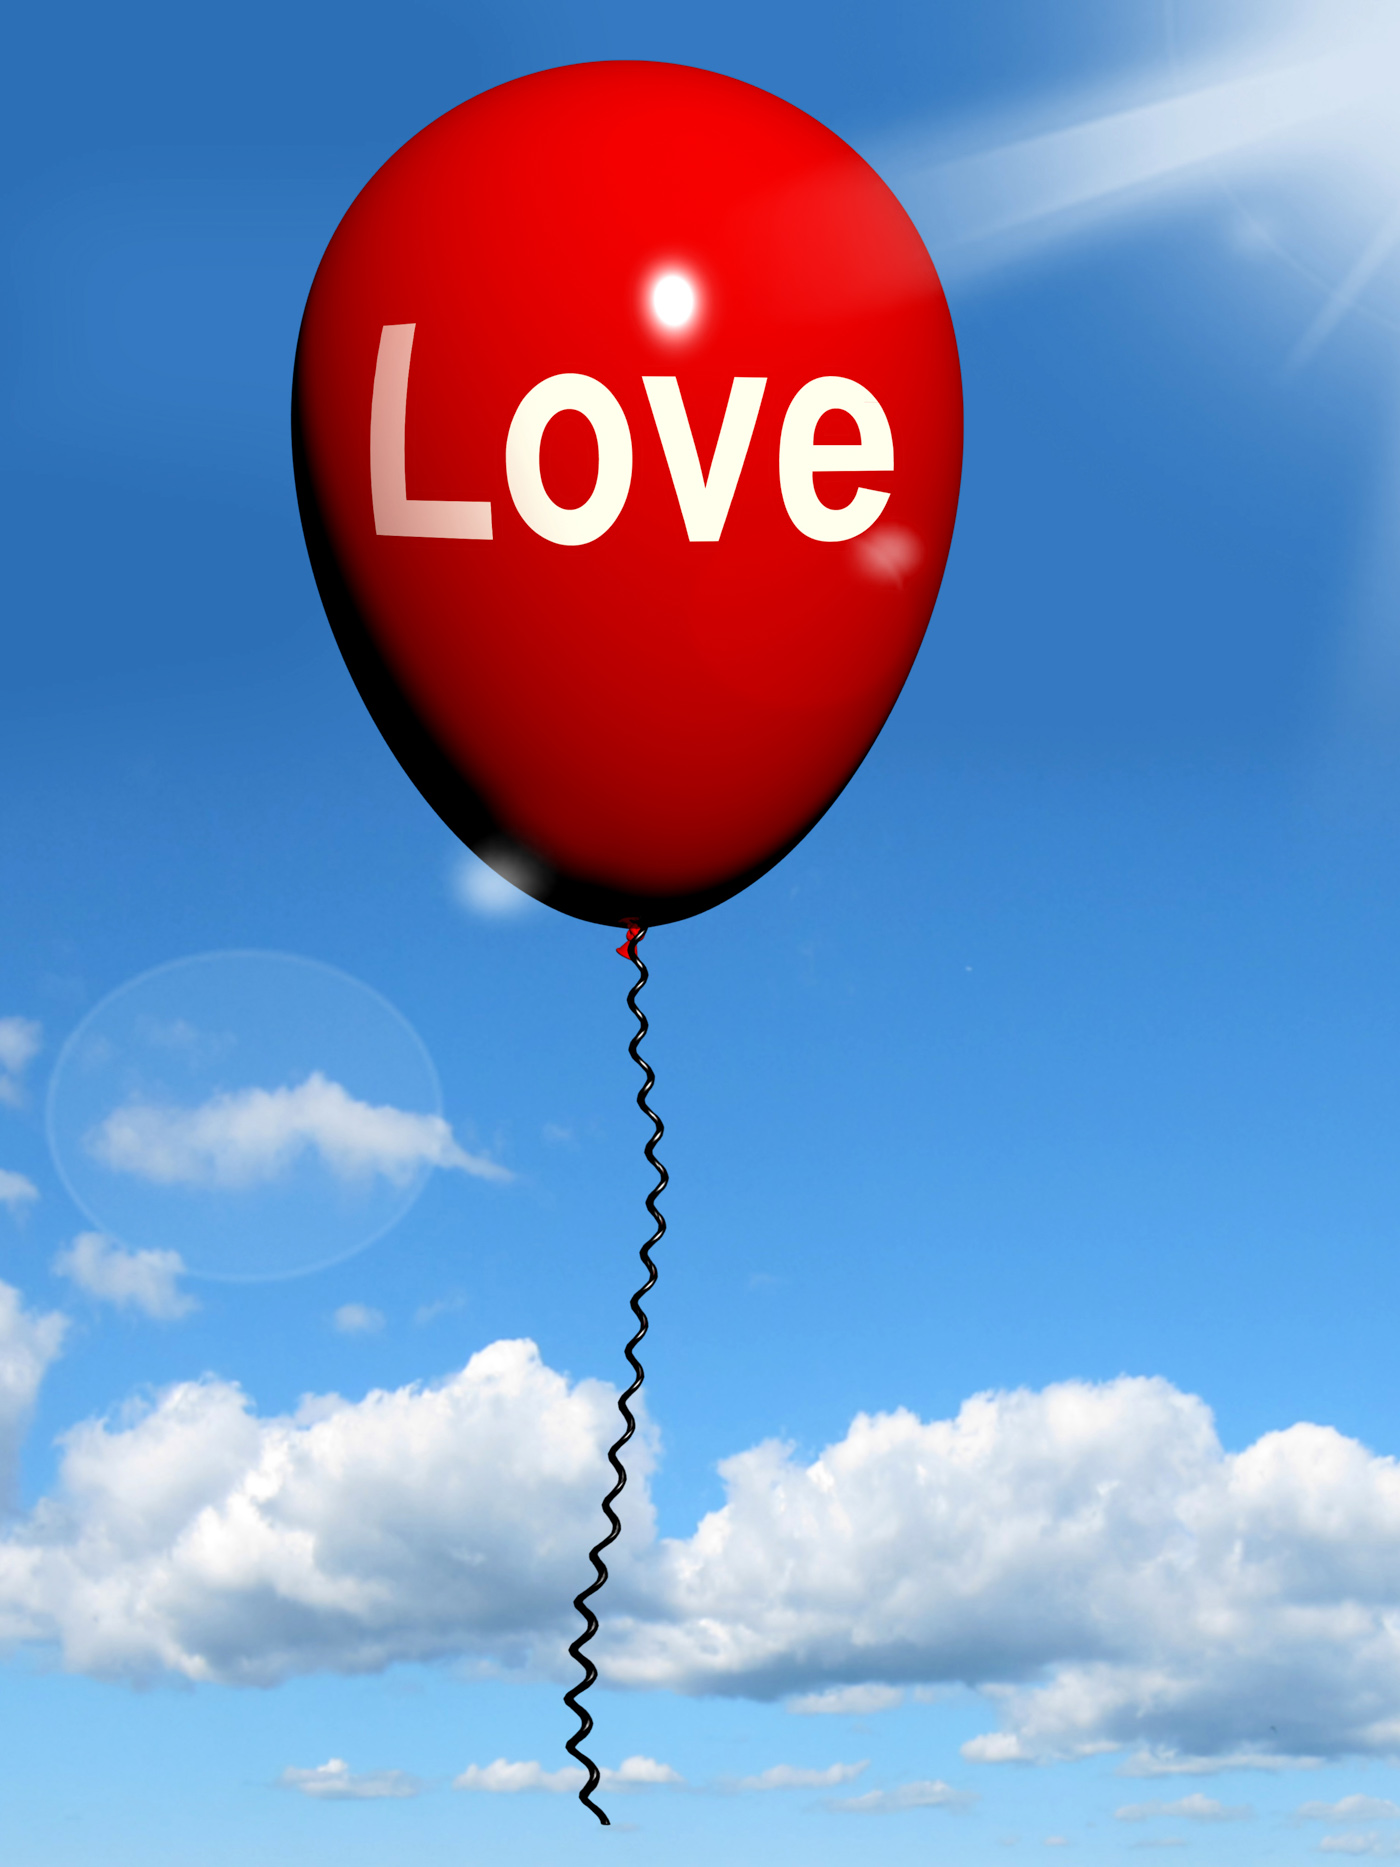 Love balloon shows fondness and affectionate feelings photo